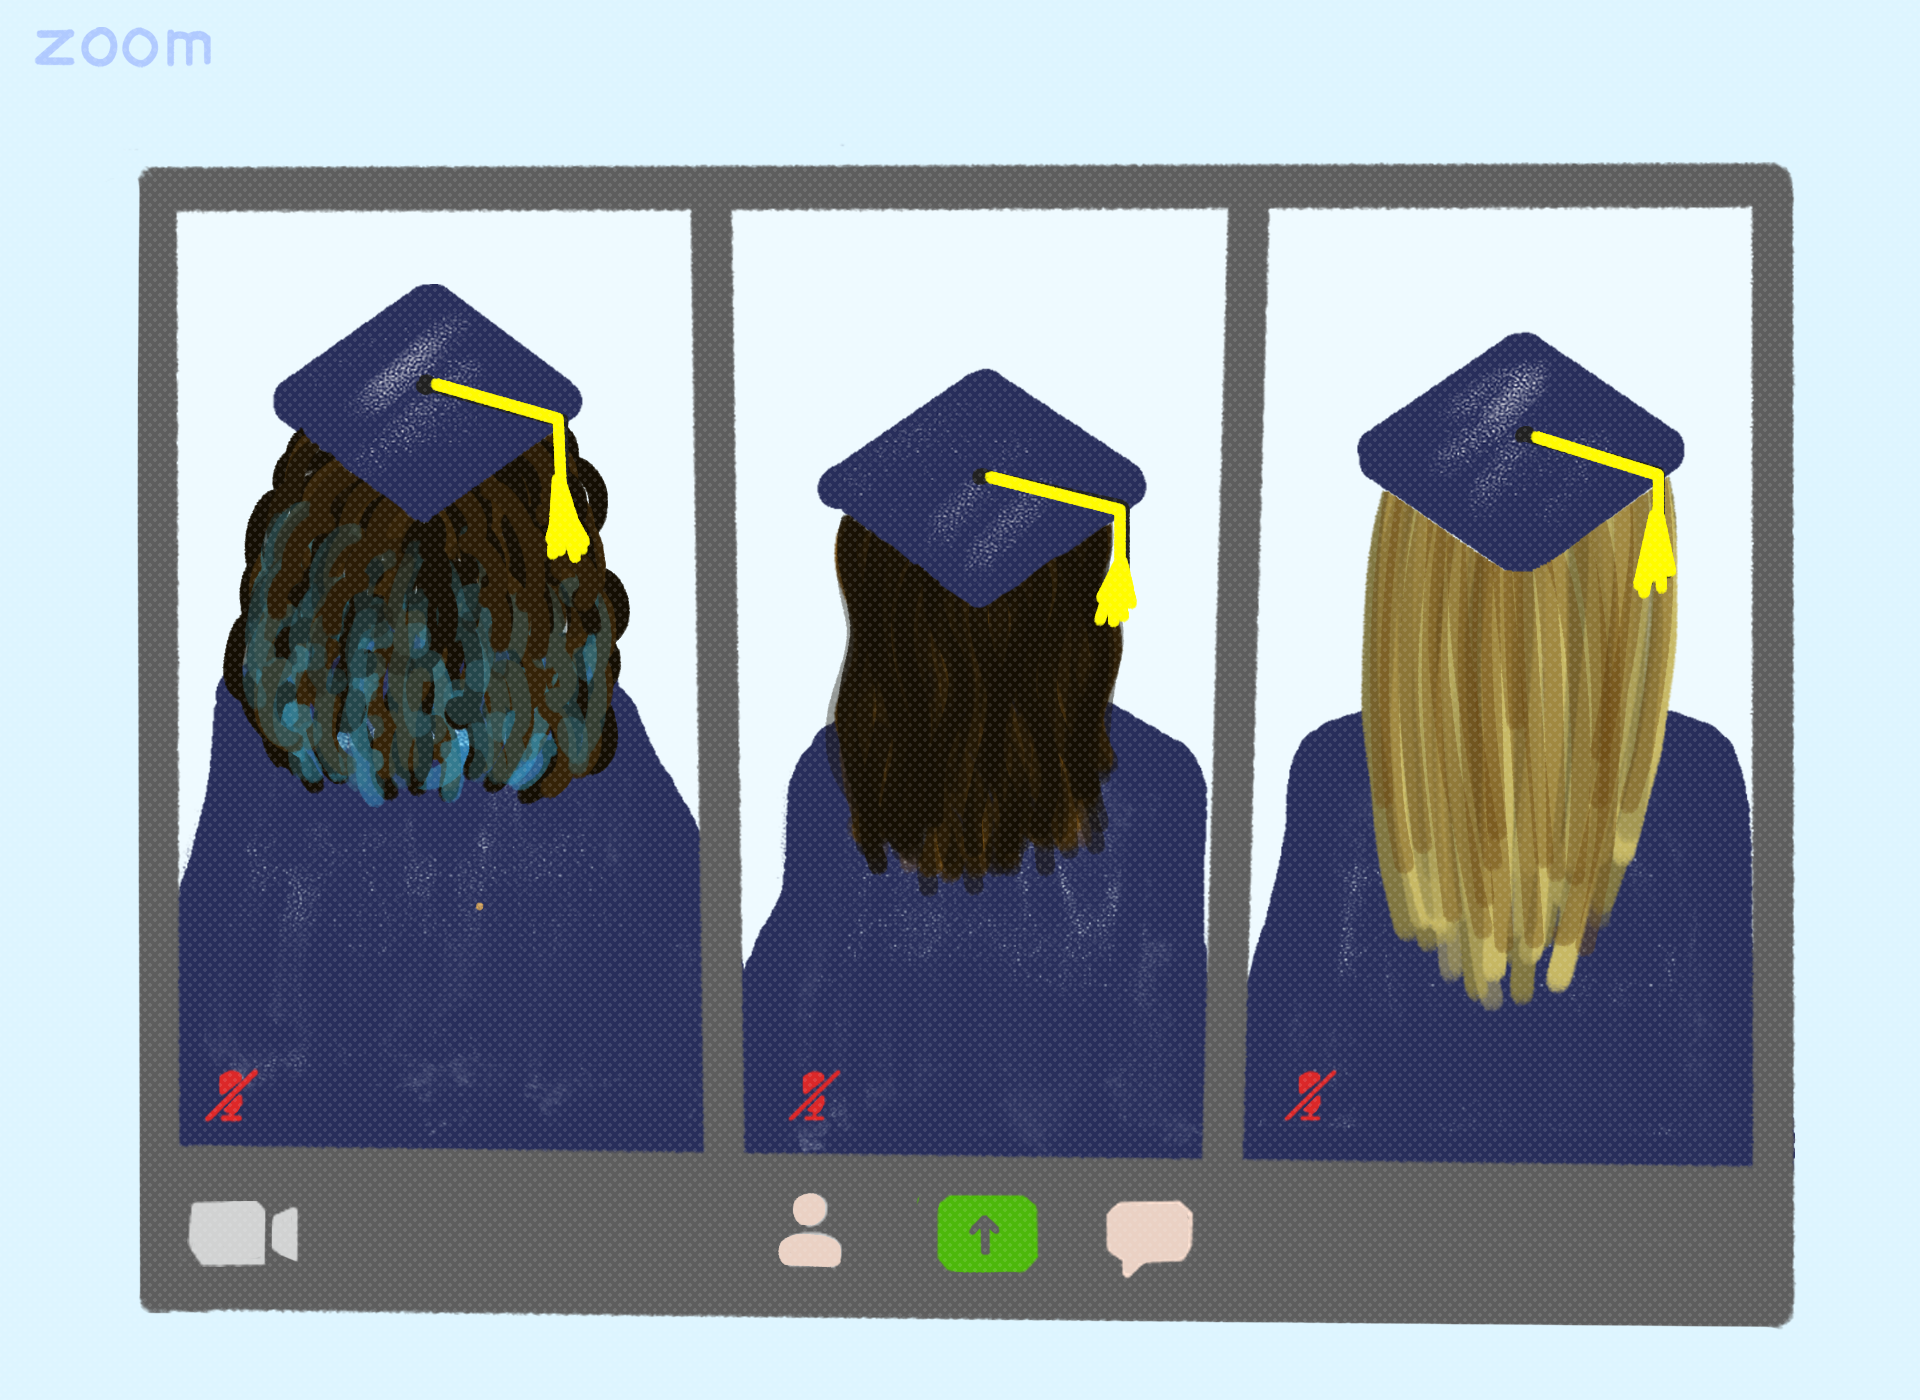 Graphic of three students in graduation robes with their backs to the camera on a Zoom call.